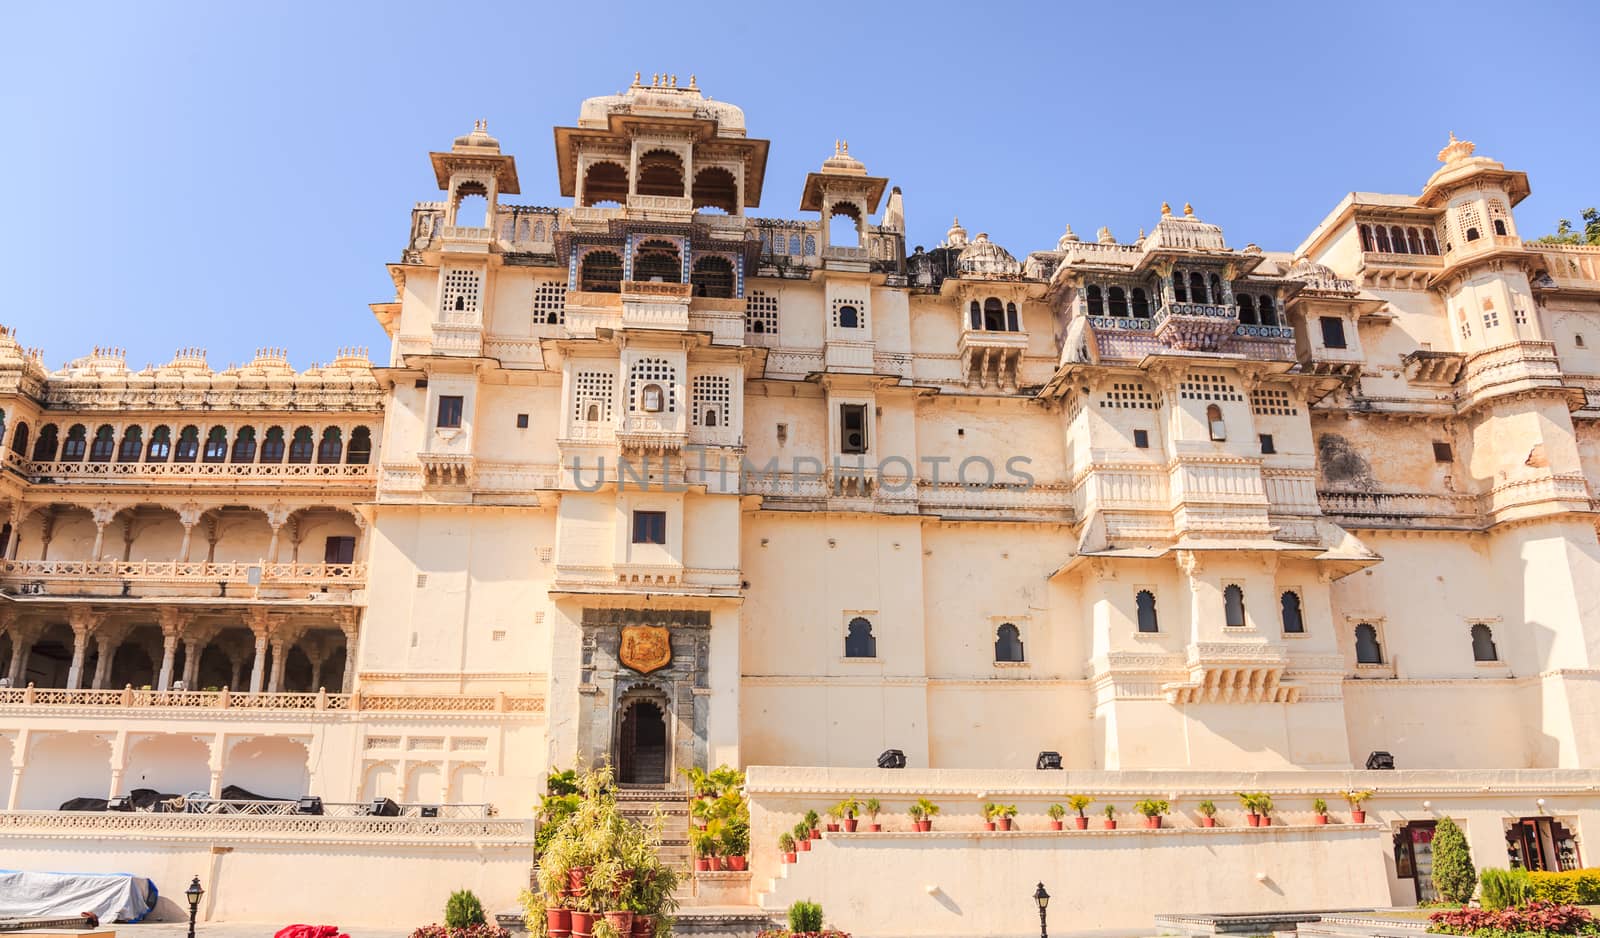 Udaipur City Palace in Rajasthan State, India